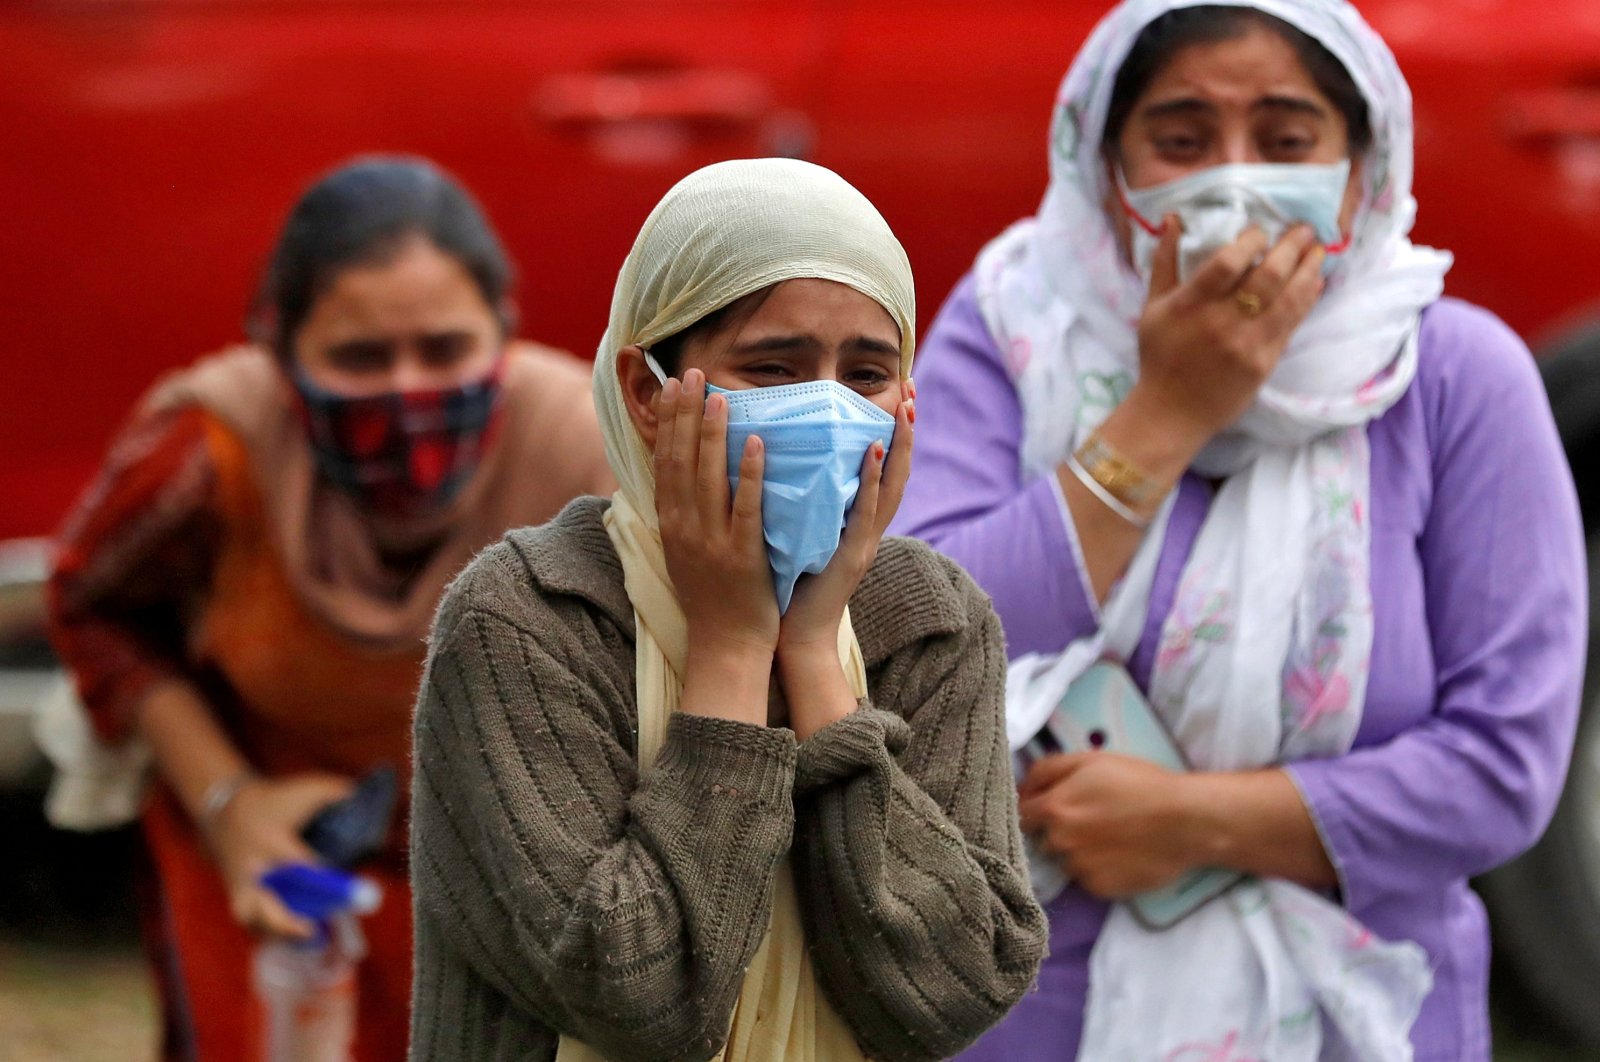 Relatives of a man who died from the coronavirus disease (COVID-19) mourn during his cremation at a crematorium ground in Srinagar, Indian-administered union territory of Jammu and Kashmir, May 25, 2021. (Reuters Photo)